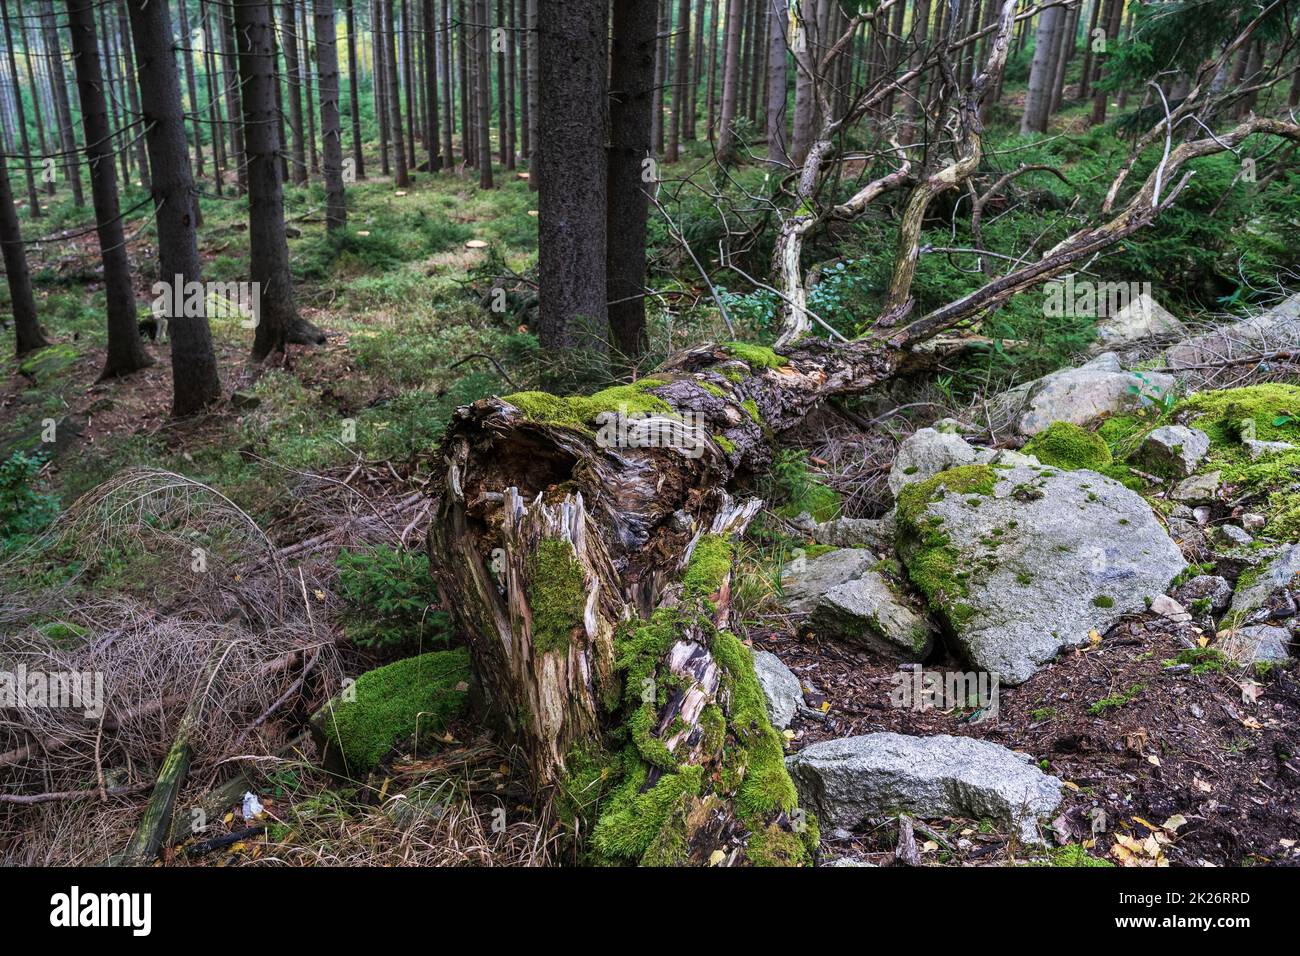 A fallen tree in a pine forest. Focus in the foreground. Stock Photo